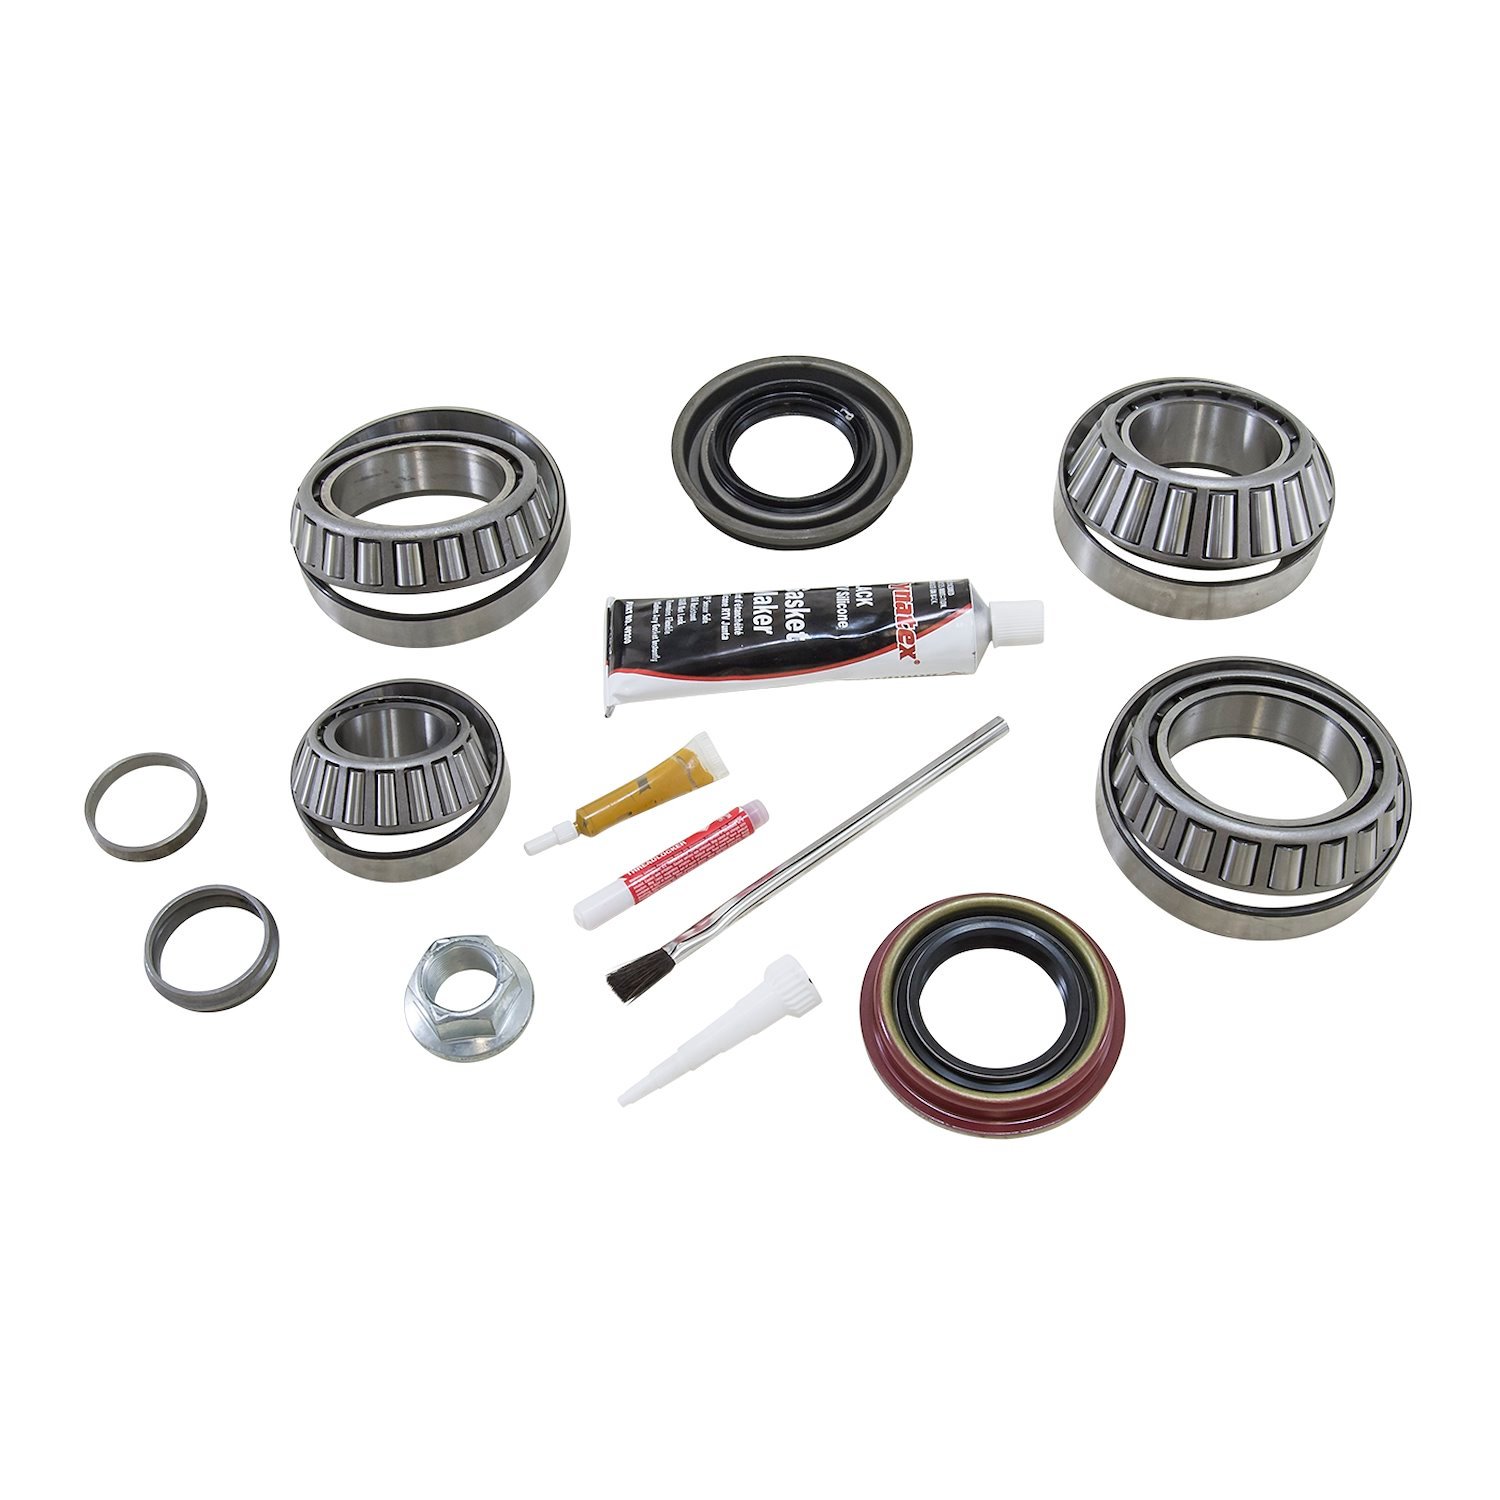 USA Standard ZBKF9.75A Bearing Kit, For '97-'98 Ford 9.75